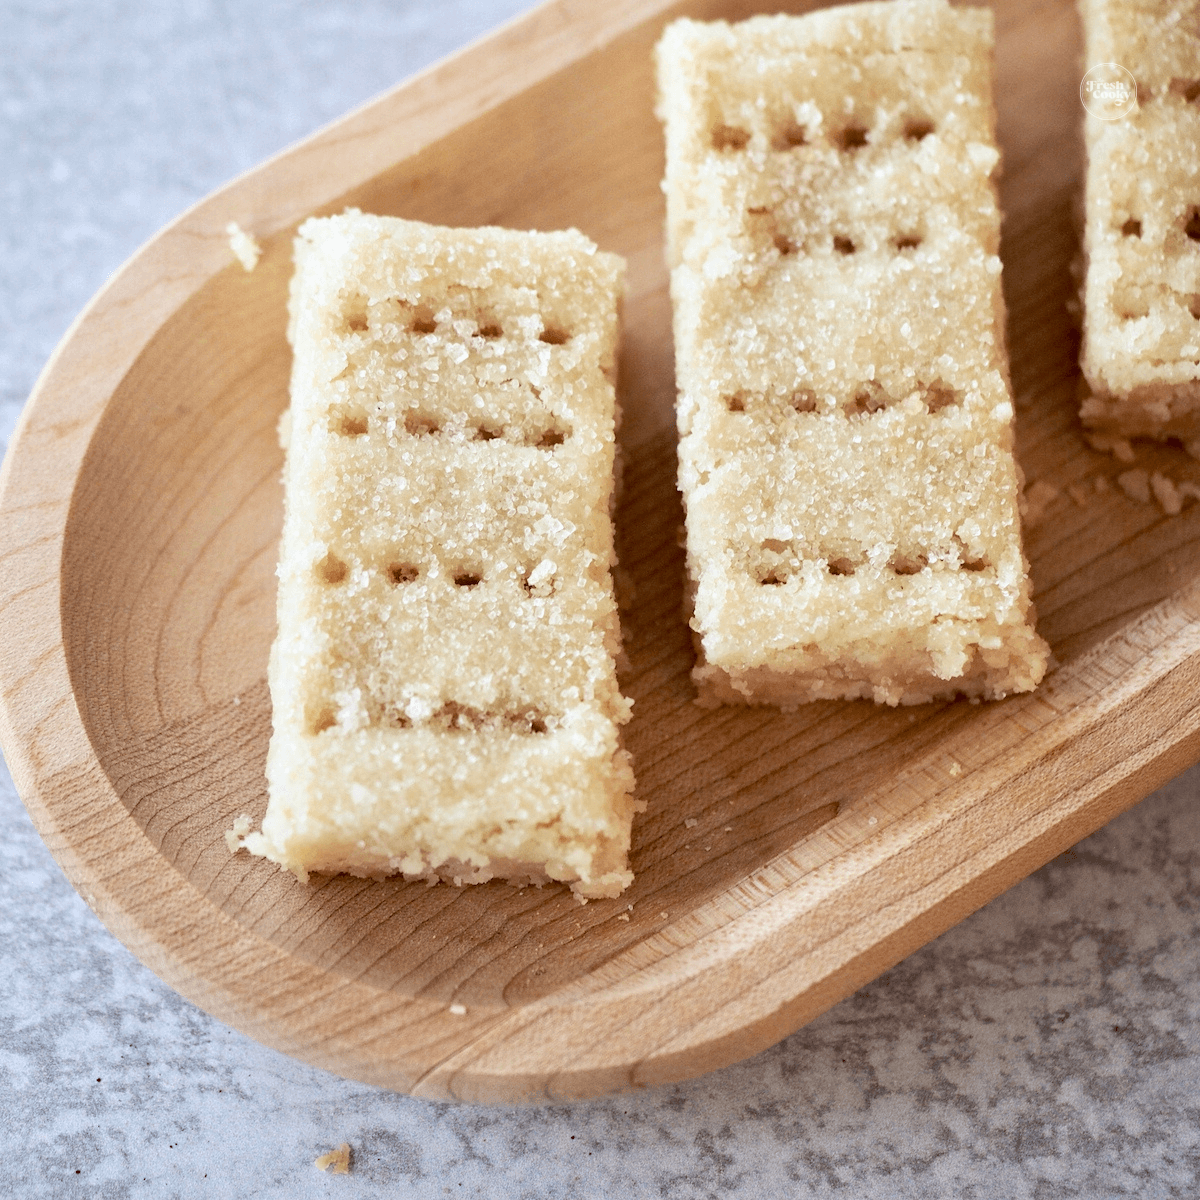 https://www.thefreshcooky.com/wp-content/uploads/2020/11/Scottish-Shortbread-square-2.png